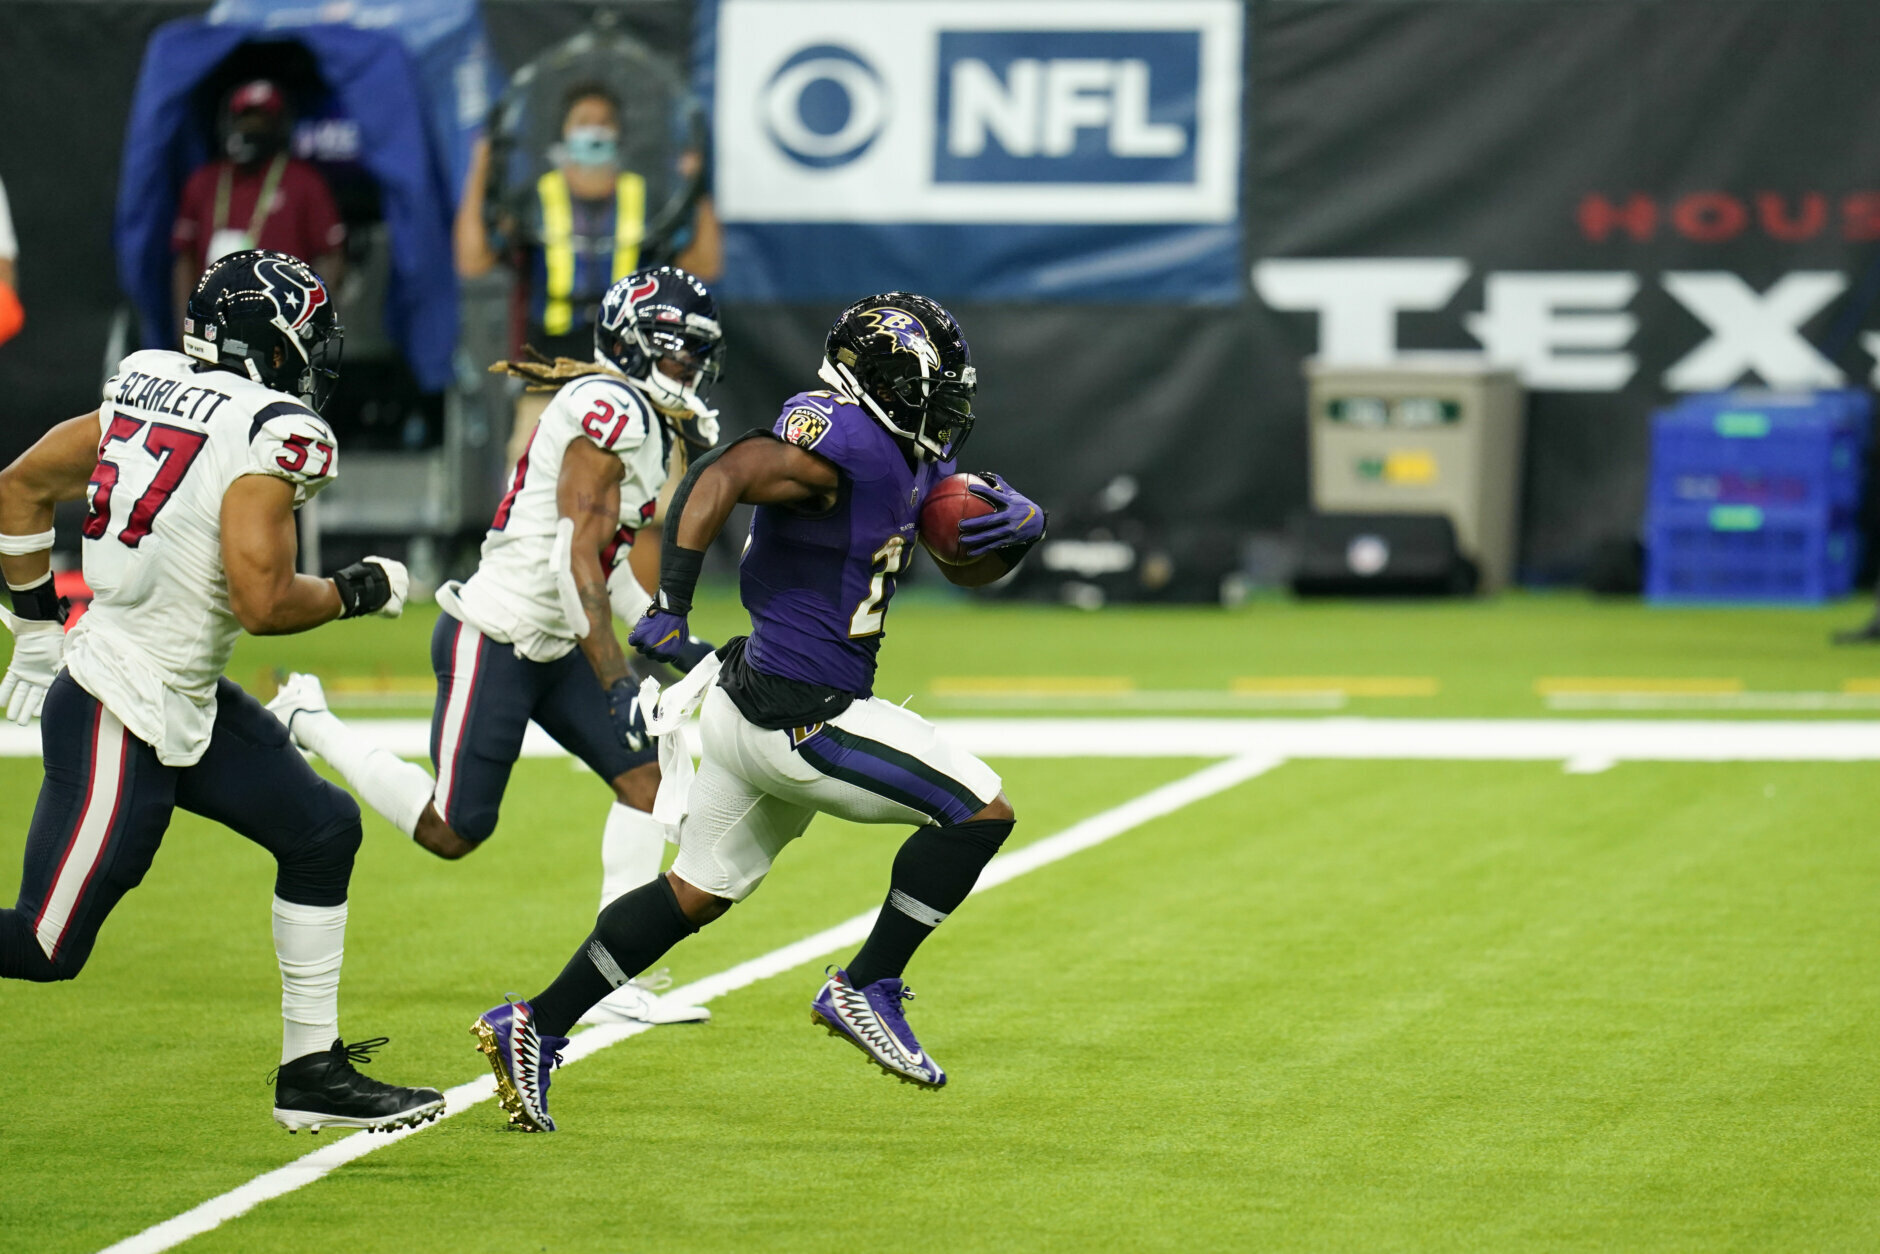 <p><b><i>Ravens 33</i></b><br />
<b><i>Texans 16</i></b></p>
<p>Baltimore has won 14 consecutive regular-season games and gone 13 straight regular season games without trailing in the second half.</p>
<p>If the Ravens keep both streaks intact after facing the Chiefs next week, <a href="https://wtop.com/nfl/2020/09/2020-afc-north-preview/">they&#8217;re everything I said they are</a>.</p>
